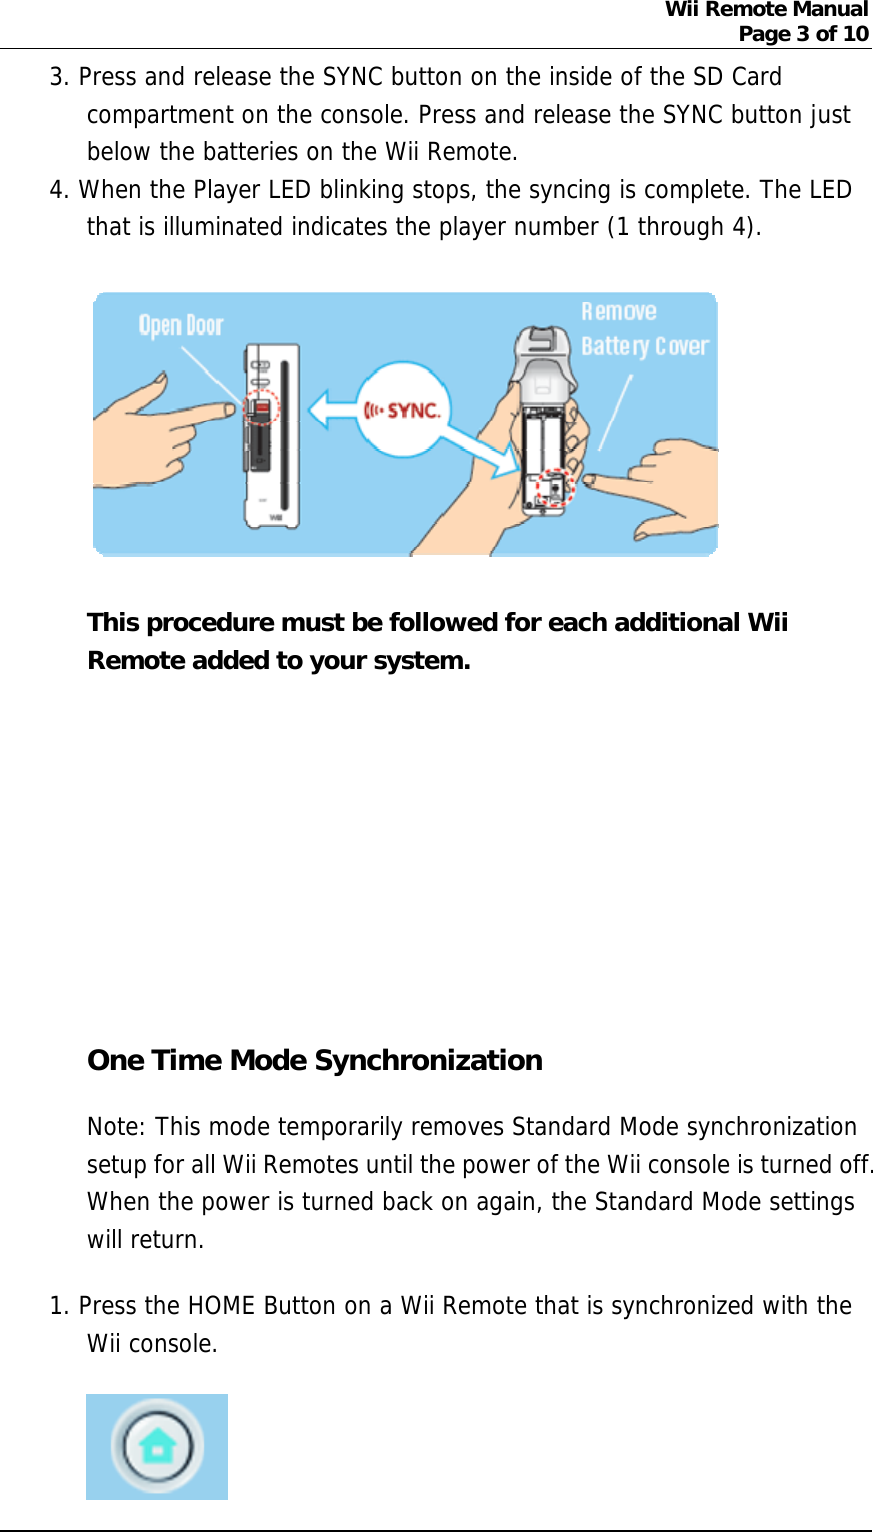 Wii Remote Manual Page 3 of 10  3. Press and release the SYNC button on the inside of the SD Card compartment on the console. Press and release the SYNC button just below the batteries on the Wii Remote.   4. When the Player LED blinking stops, the syncing is complete. The LED that is illuminated indicates the player number (1 through 4).   This procedure must be followed for each additional Wii Remote added to your system.        One Time Mode Synchronization Note: This mode temporarily removes Standard Mode synchronization setup for all Wii Remotes until the power of the Wii console is turned off. When the power is turned back on again, the Standard Mode settings will return. 1. Press the HOME Button on a Wii Remote that is synchronized with the Wii console.   